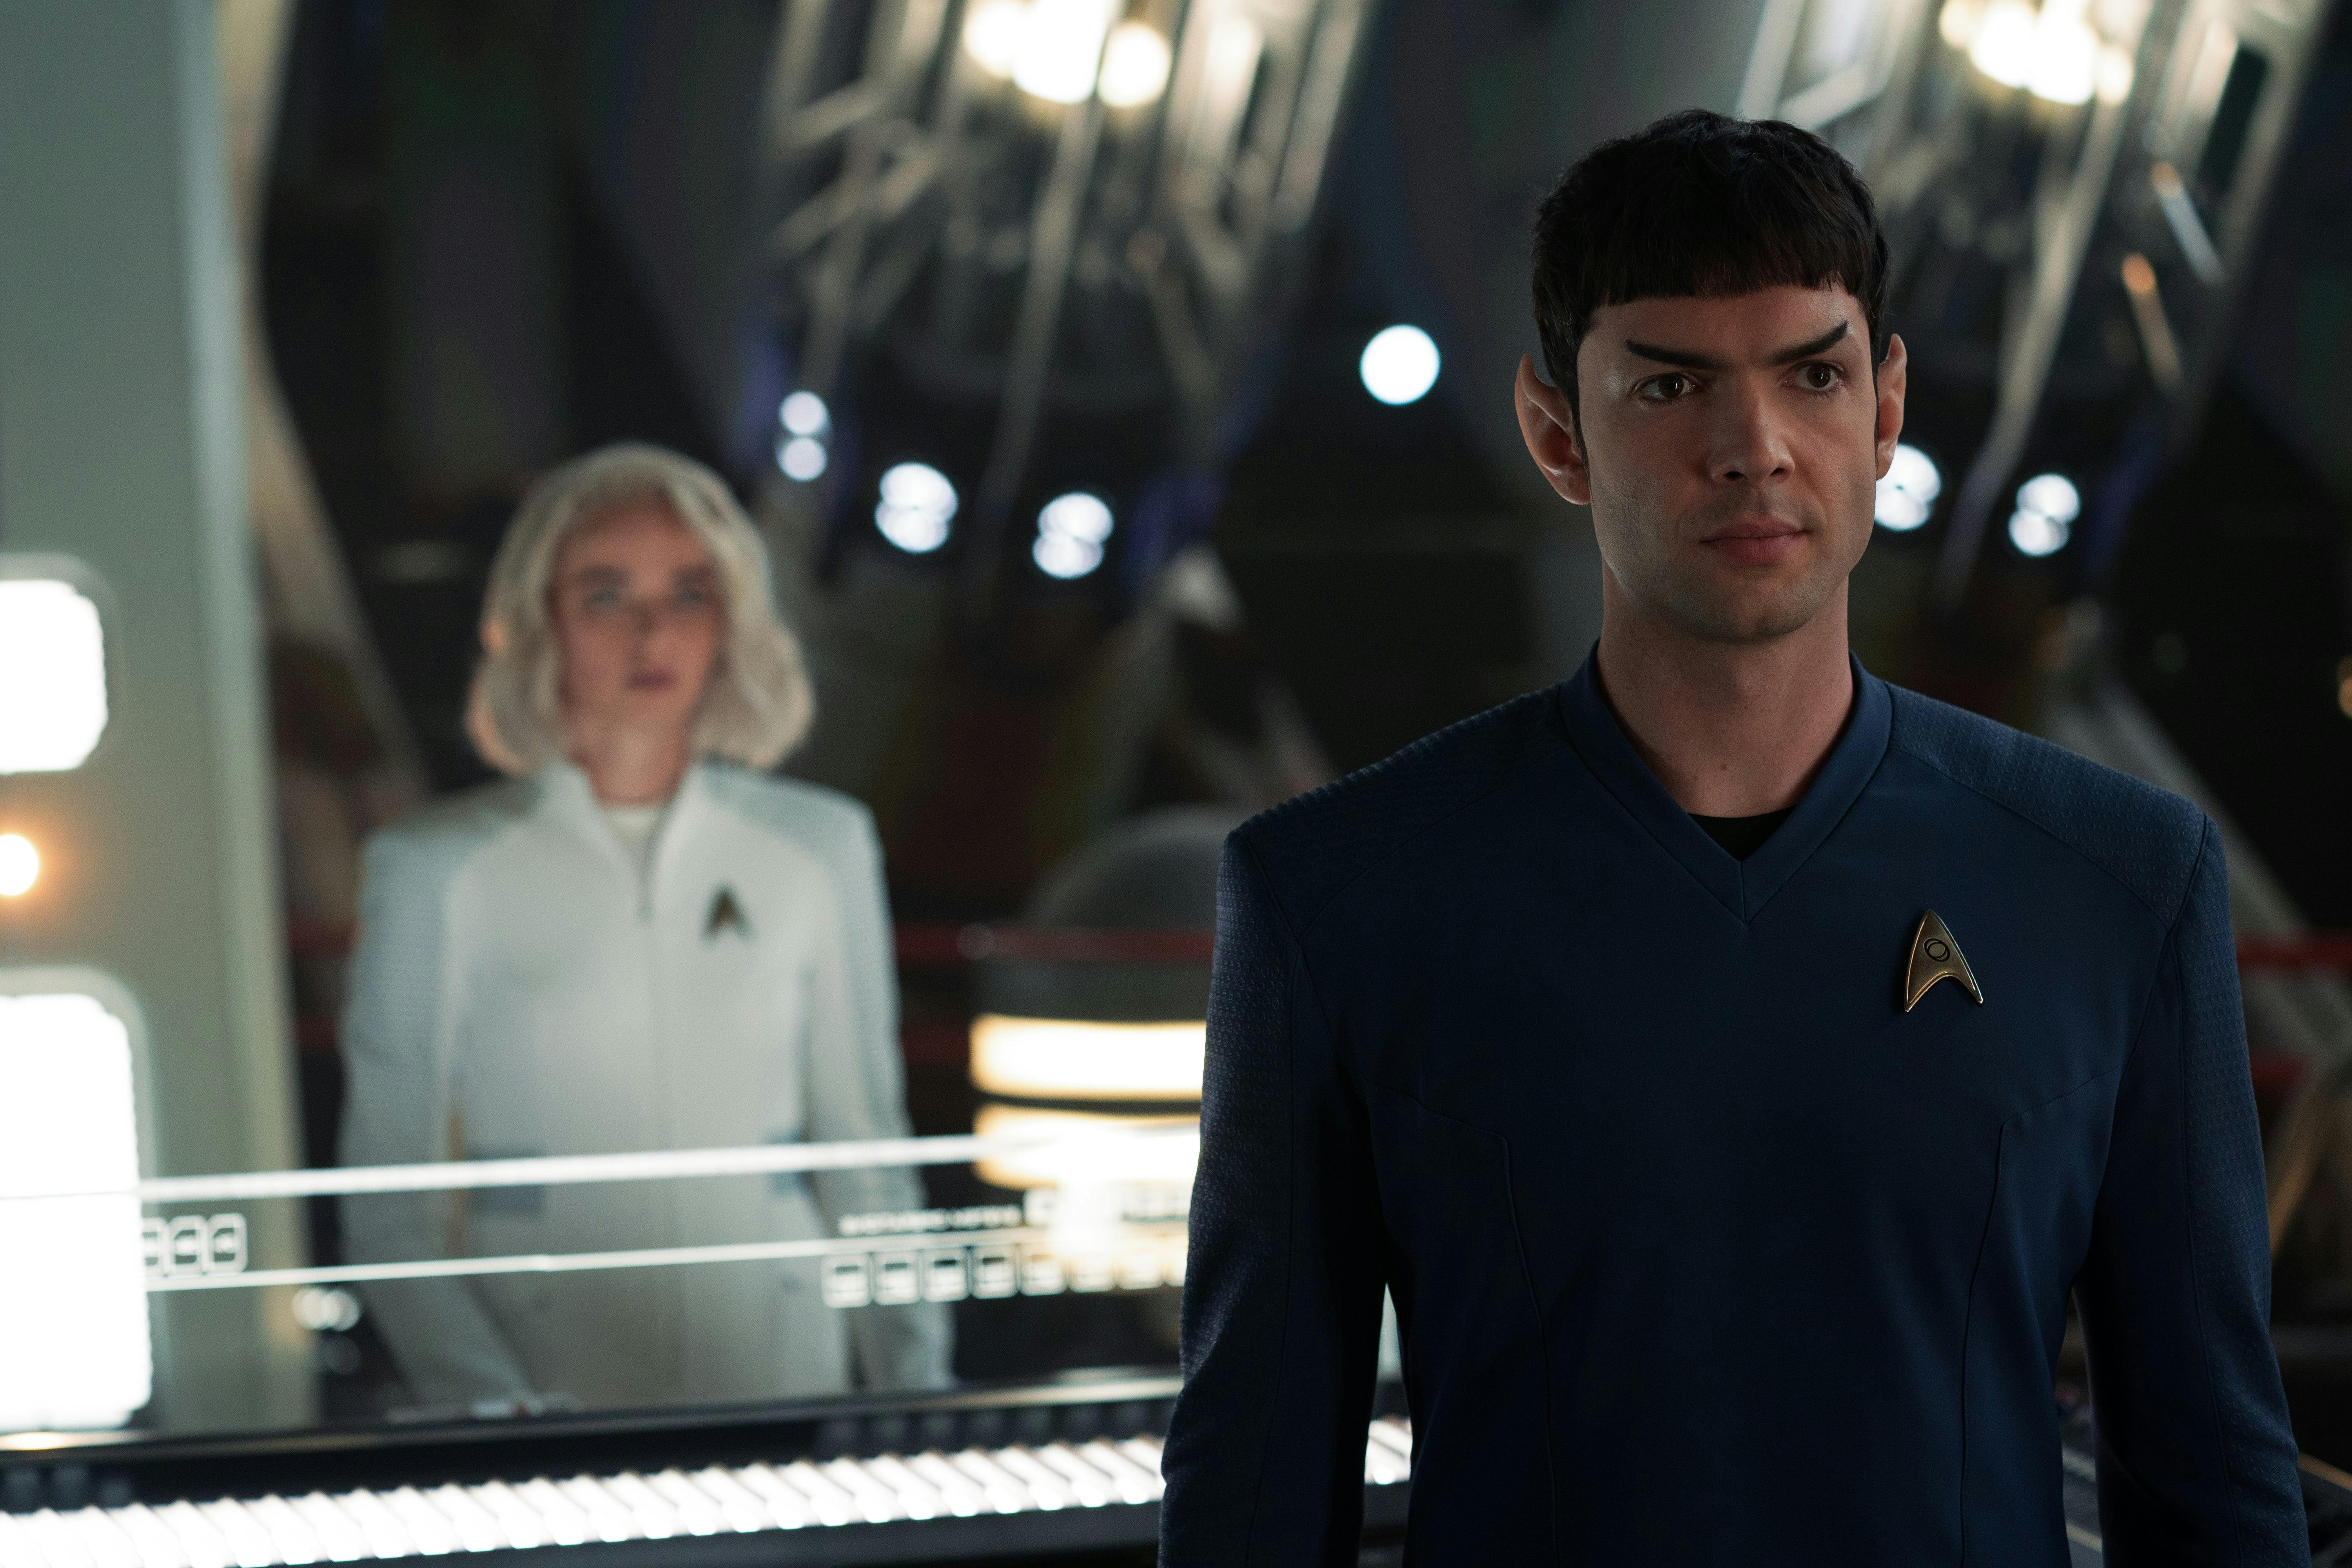 Spock (Strange New Worlds) looks at someone off camera with a neutral expression. To his right and out of focus, Chapel stands a little ways behind him.